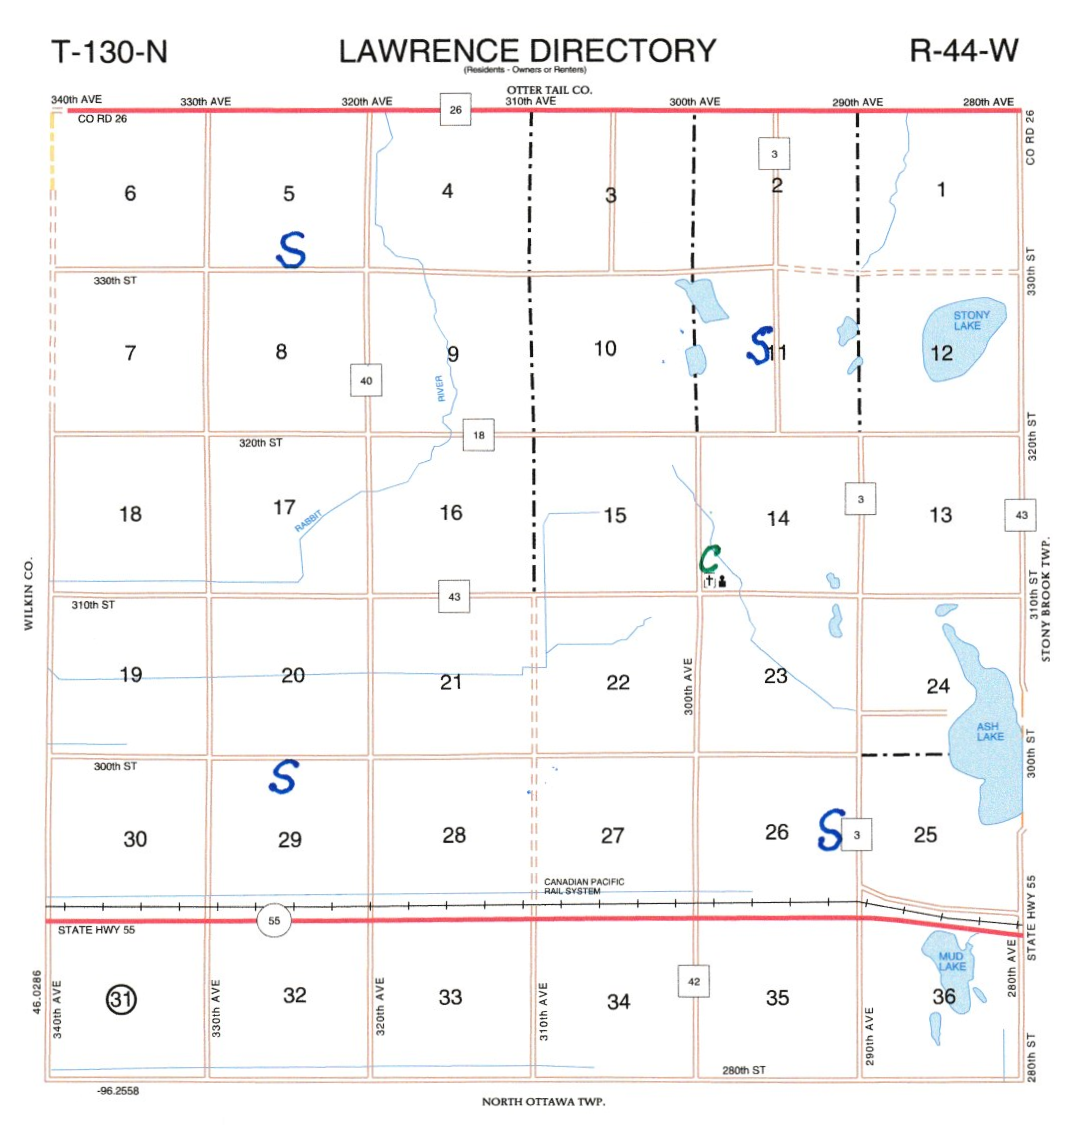 Lawrence Township early cemeteries and schools